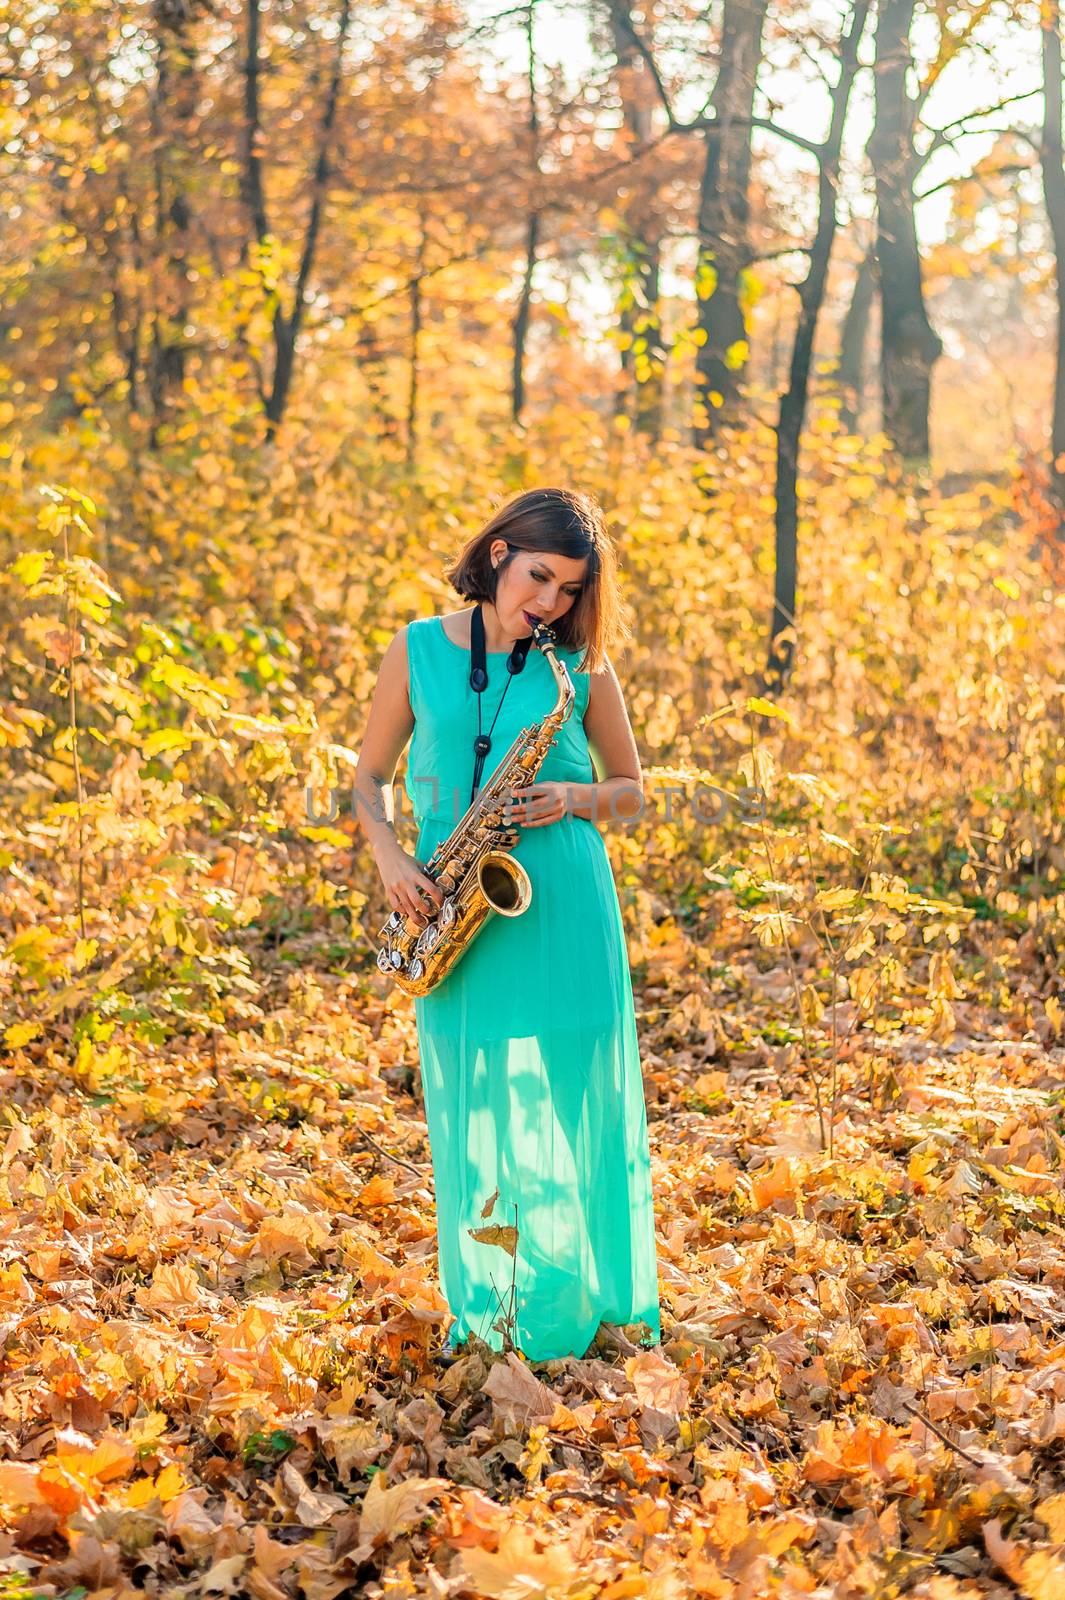 nice girl with black hair in a blue dress plays the alto saxophone in the middle of yellow foliage in a park in autumn by chernobrovin